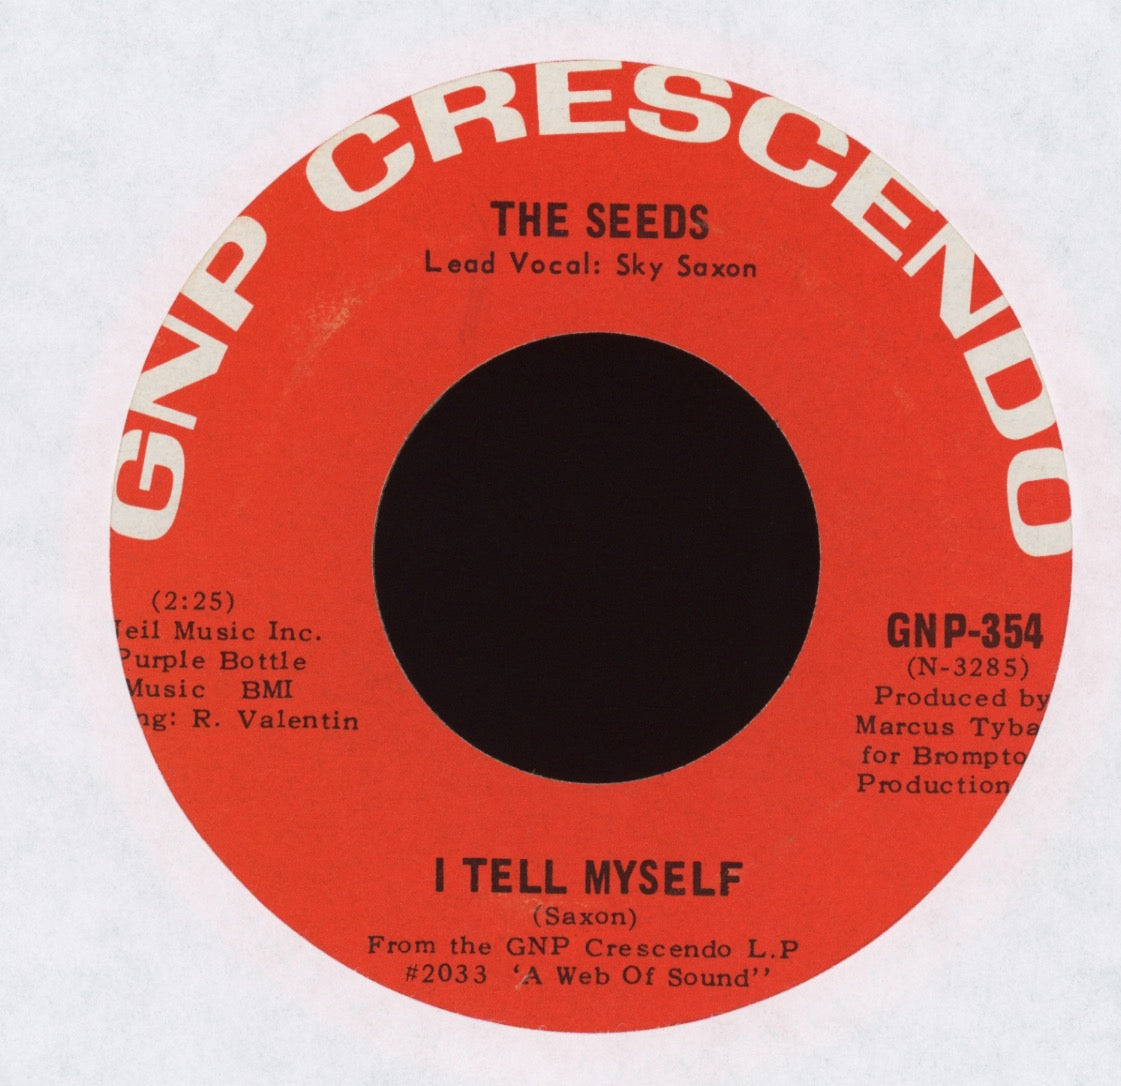 The Seeds - Can't Seem To Make You Mine on GNP Crescendo